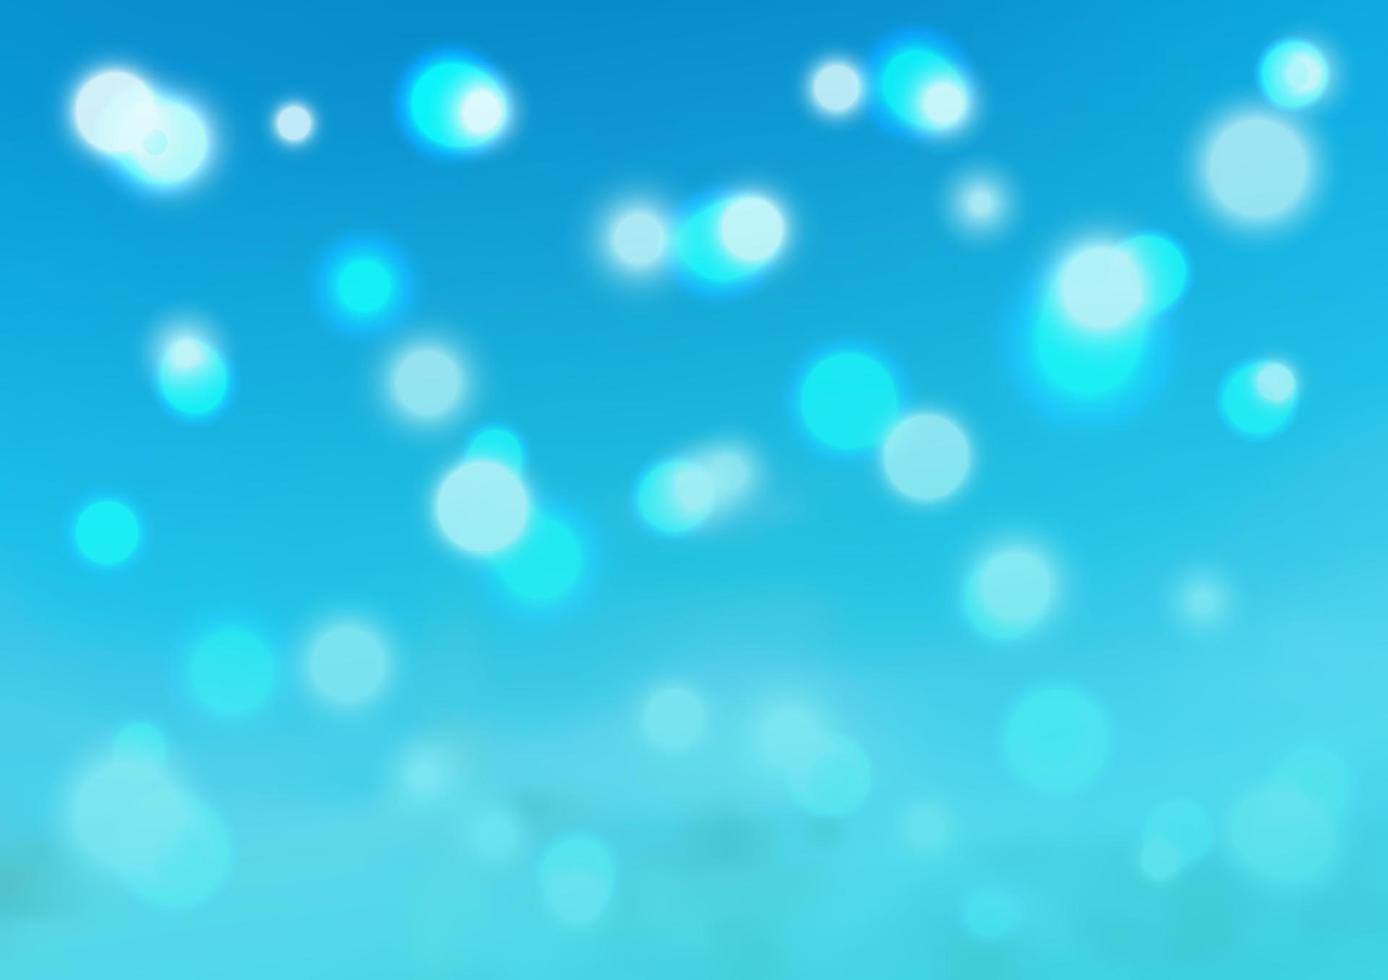 Bokeh magic light shiny beam blue color abstract background graphic design vector illustration EPS10